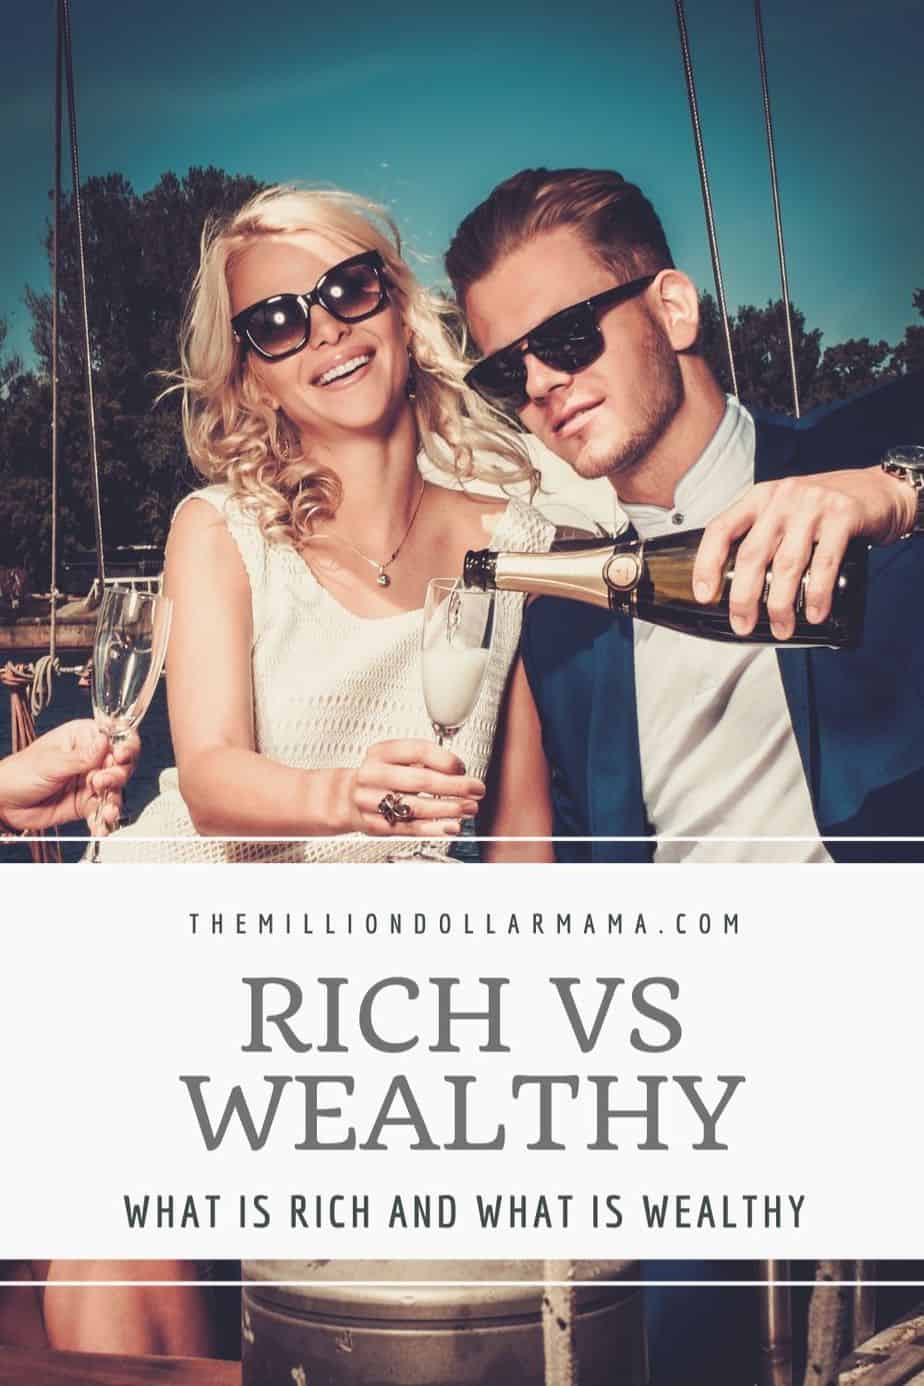 Rich Vs. Wealthy Why It's Better to be Wealthy